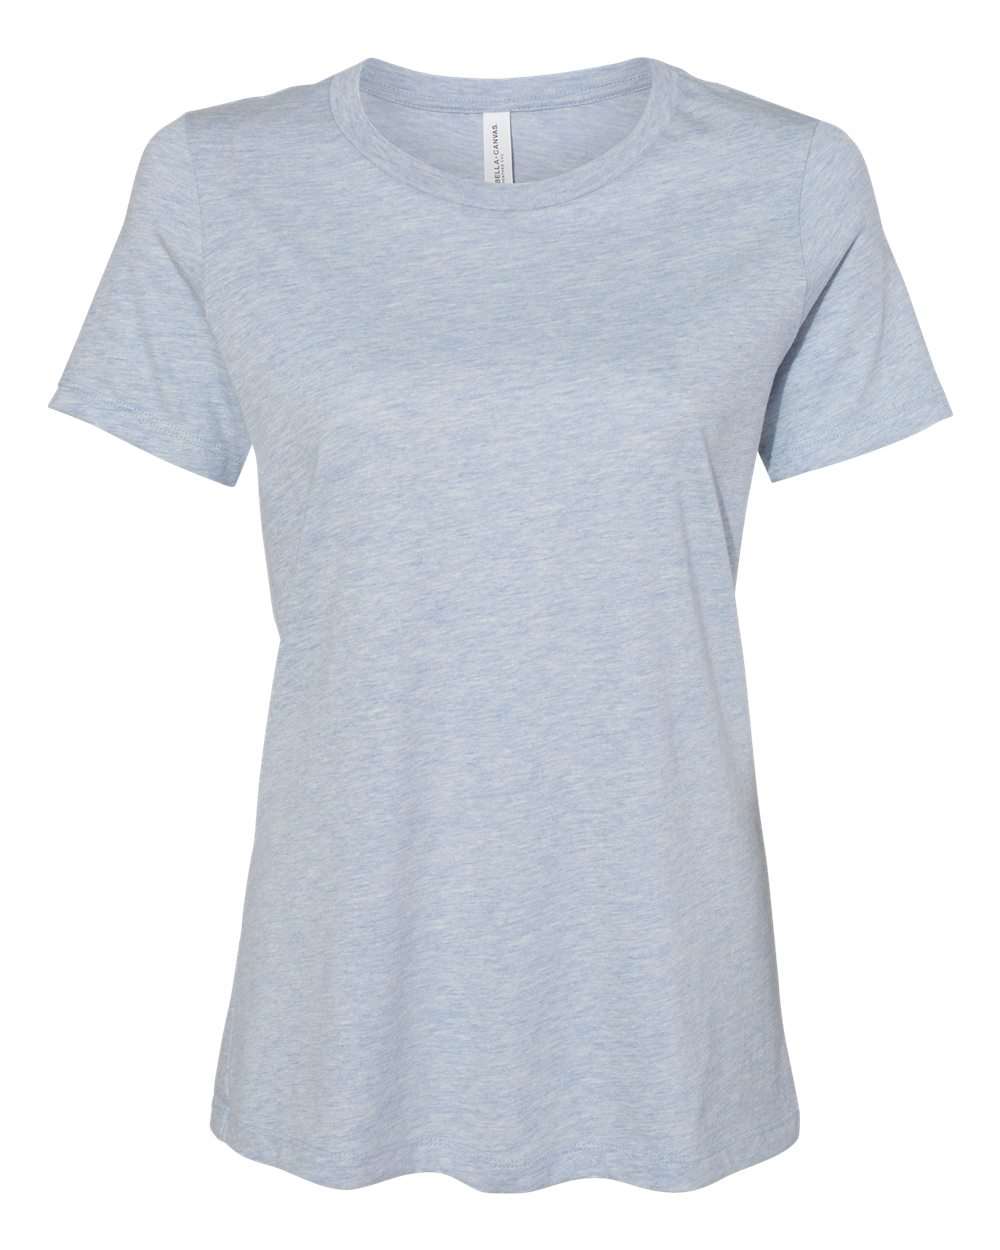 bella+canvas womens relaxed cvc tee heather prism blue